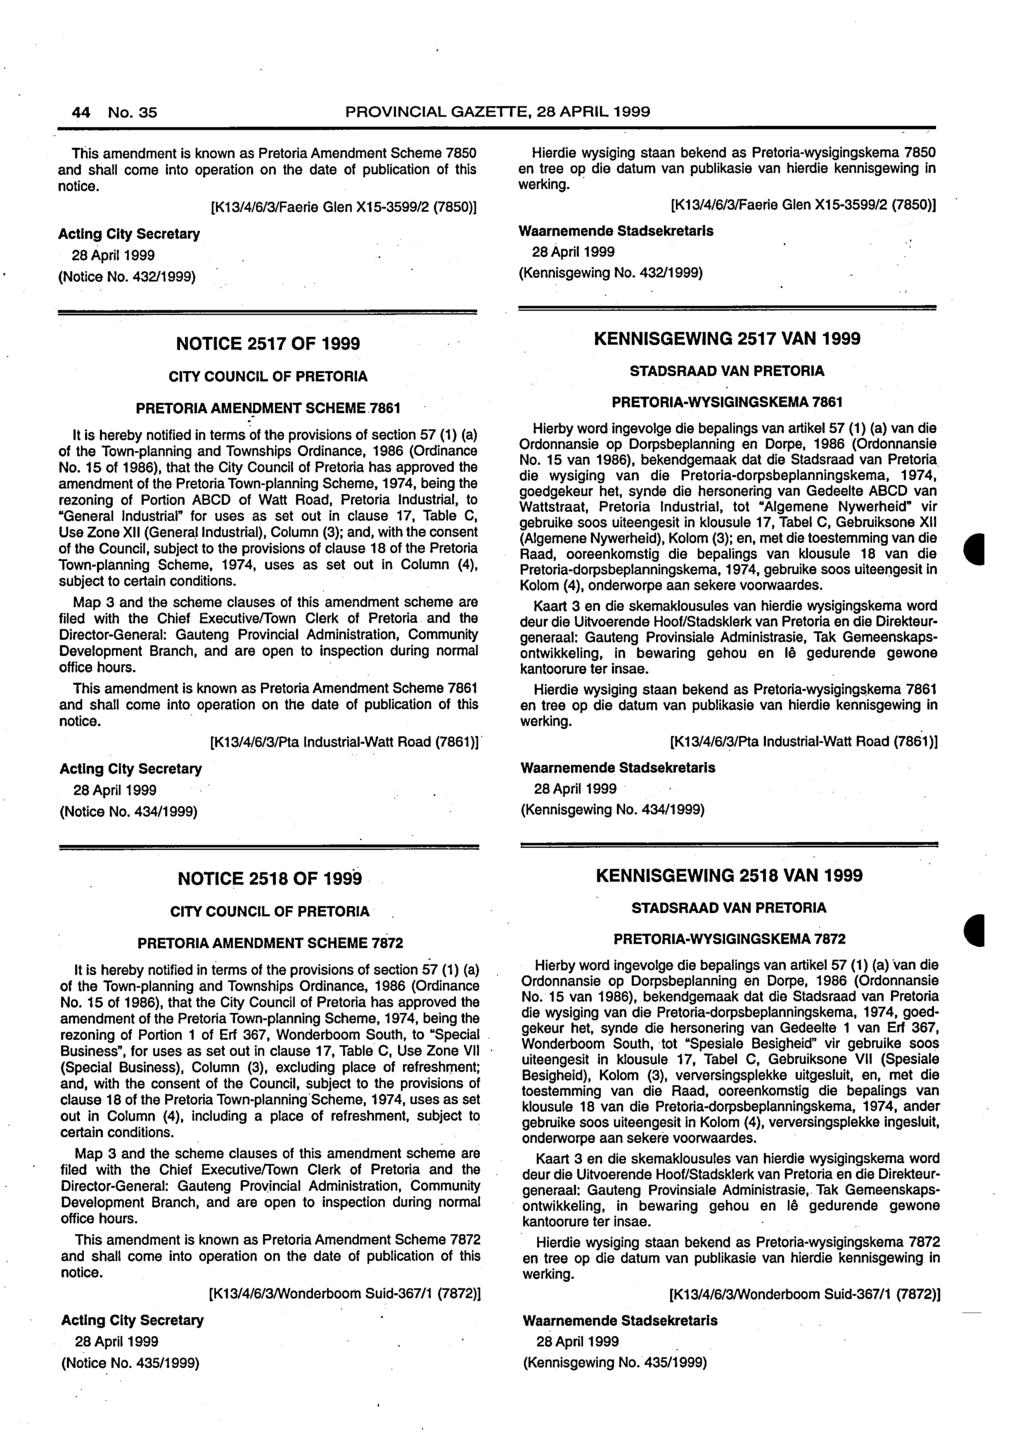 44 No.35 PROVINCIAL GAZETTE, 28 APRIL 1999 This amendment is known as Pretoria Amendment Scheme 7850 and shall come into operation on the date of publication of this notice.